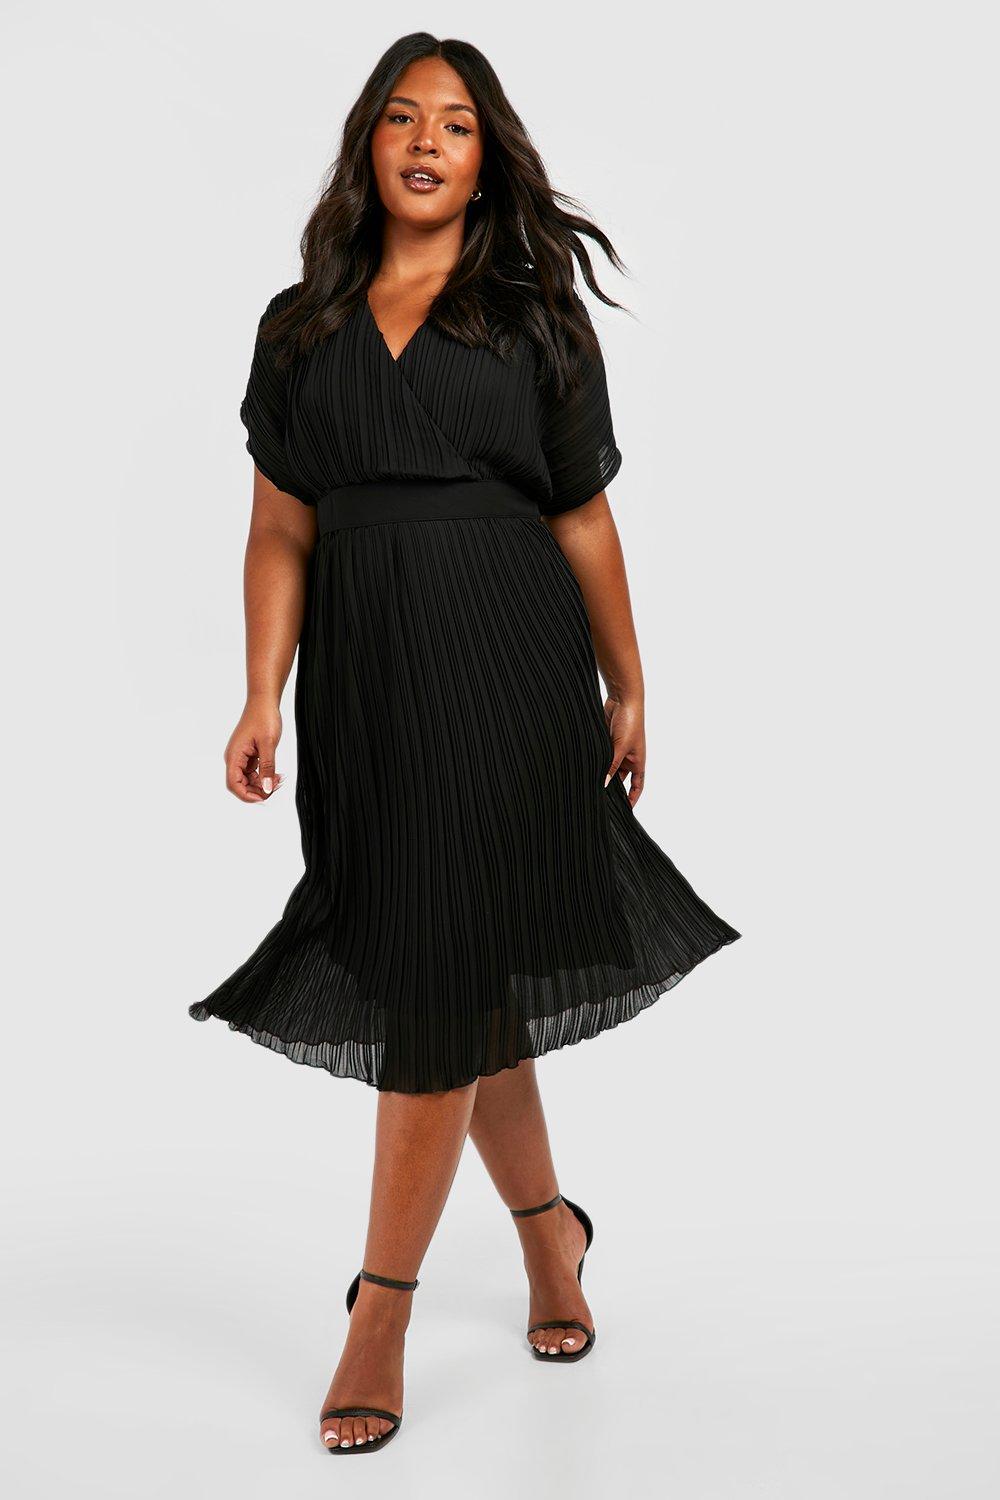 black dress for funeral plus size